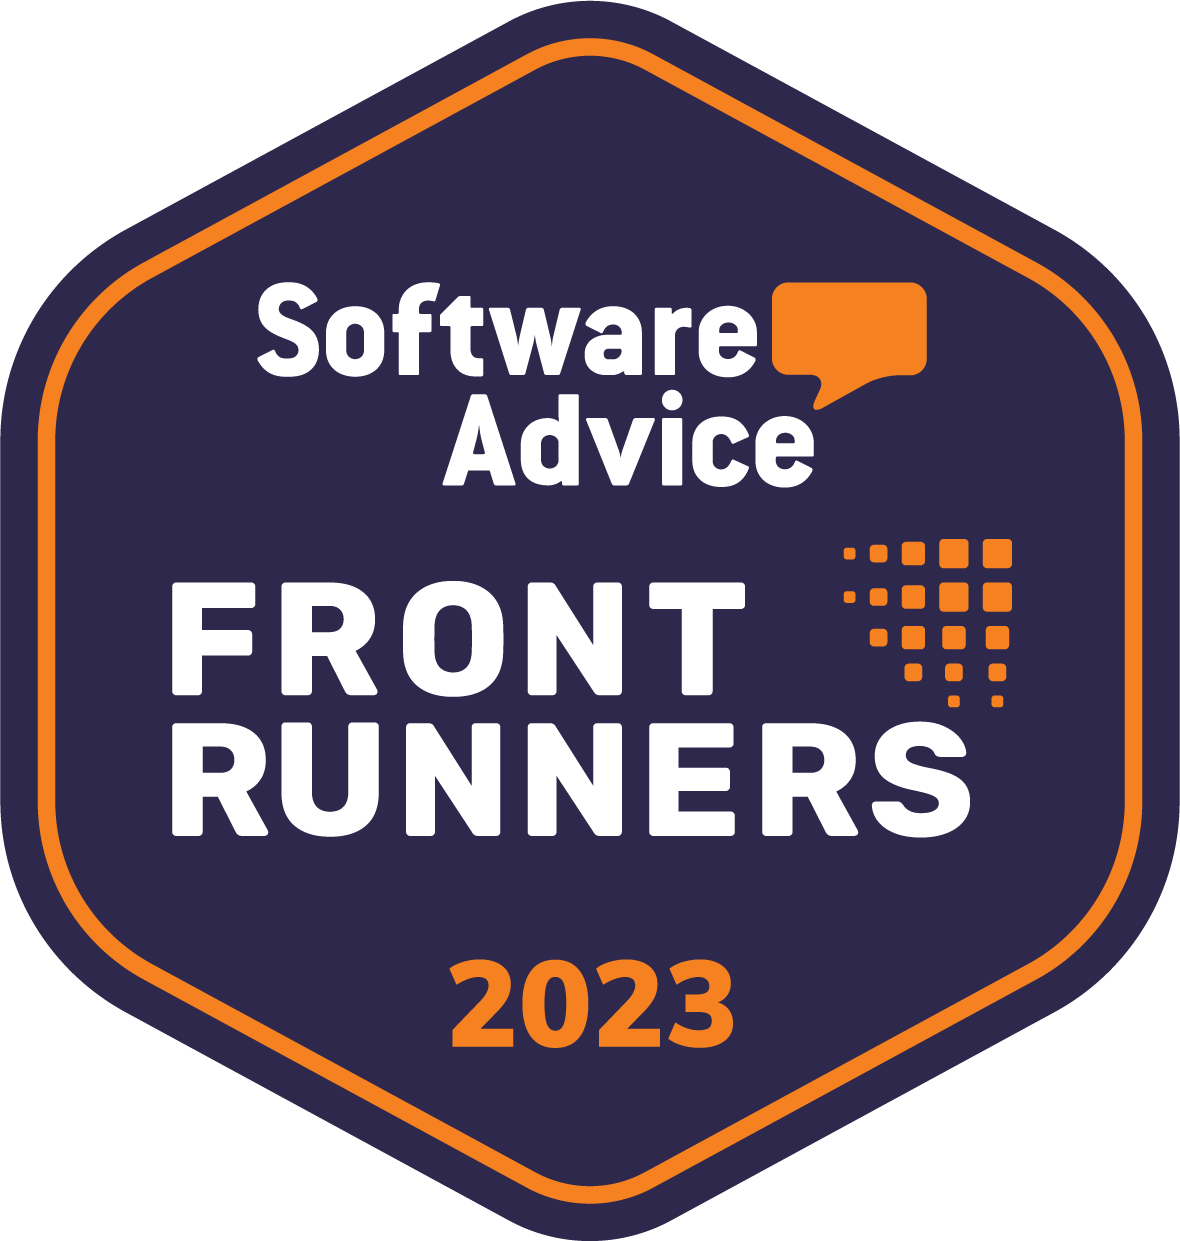 Software Advice Front Runners badge